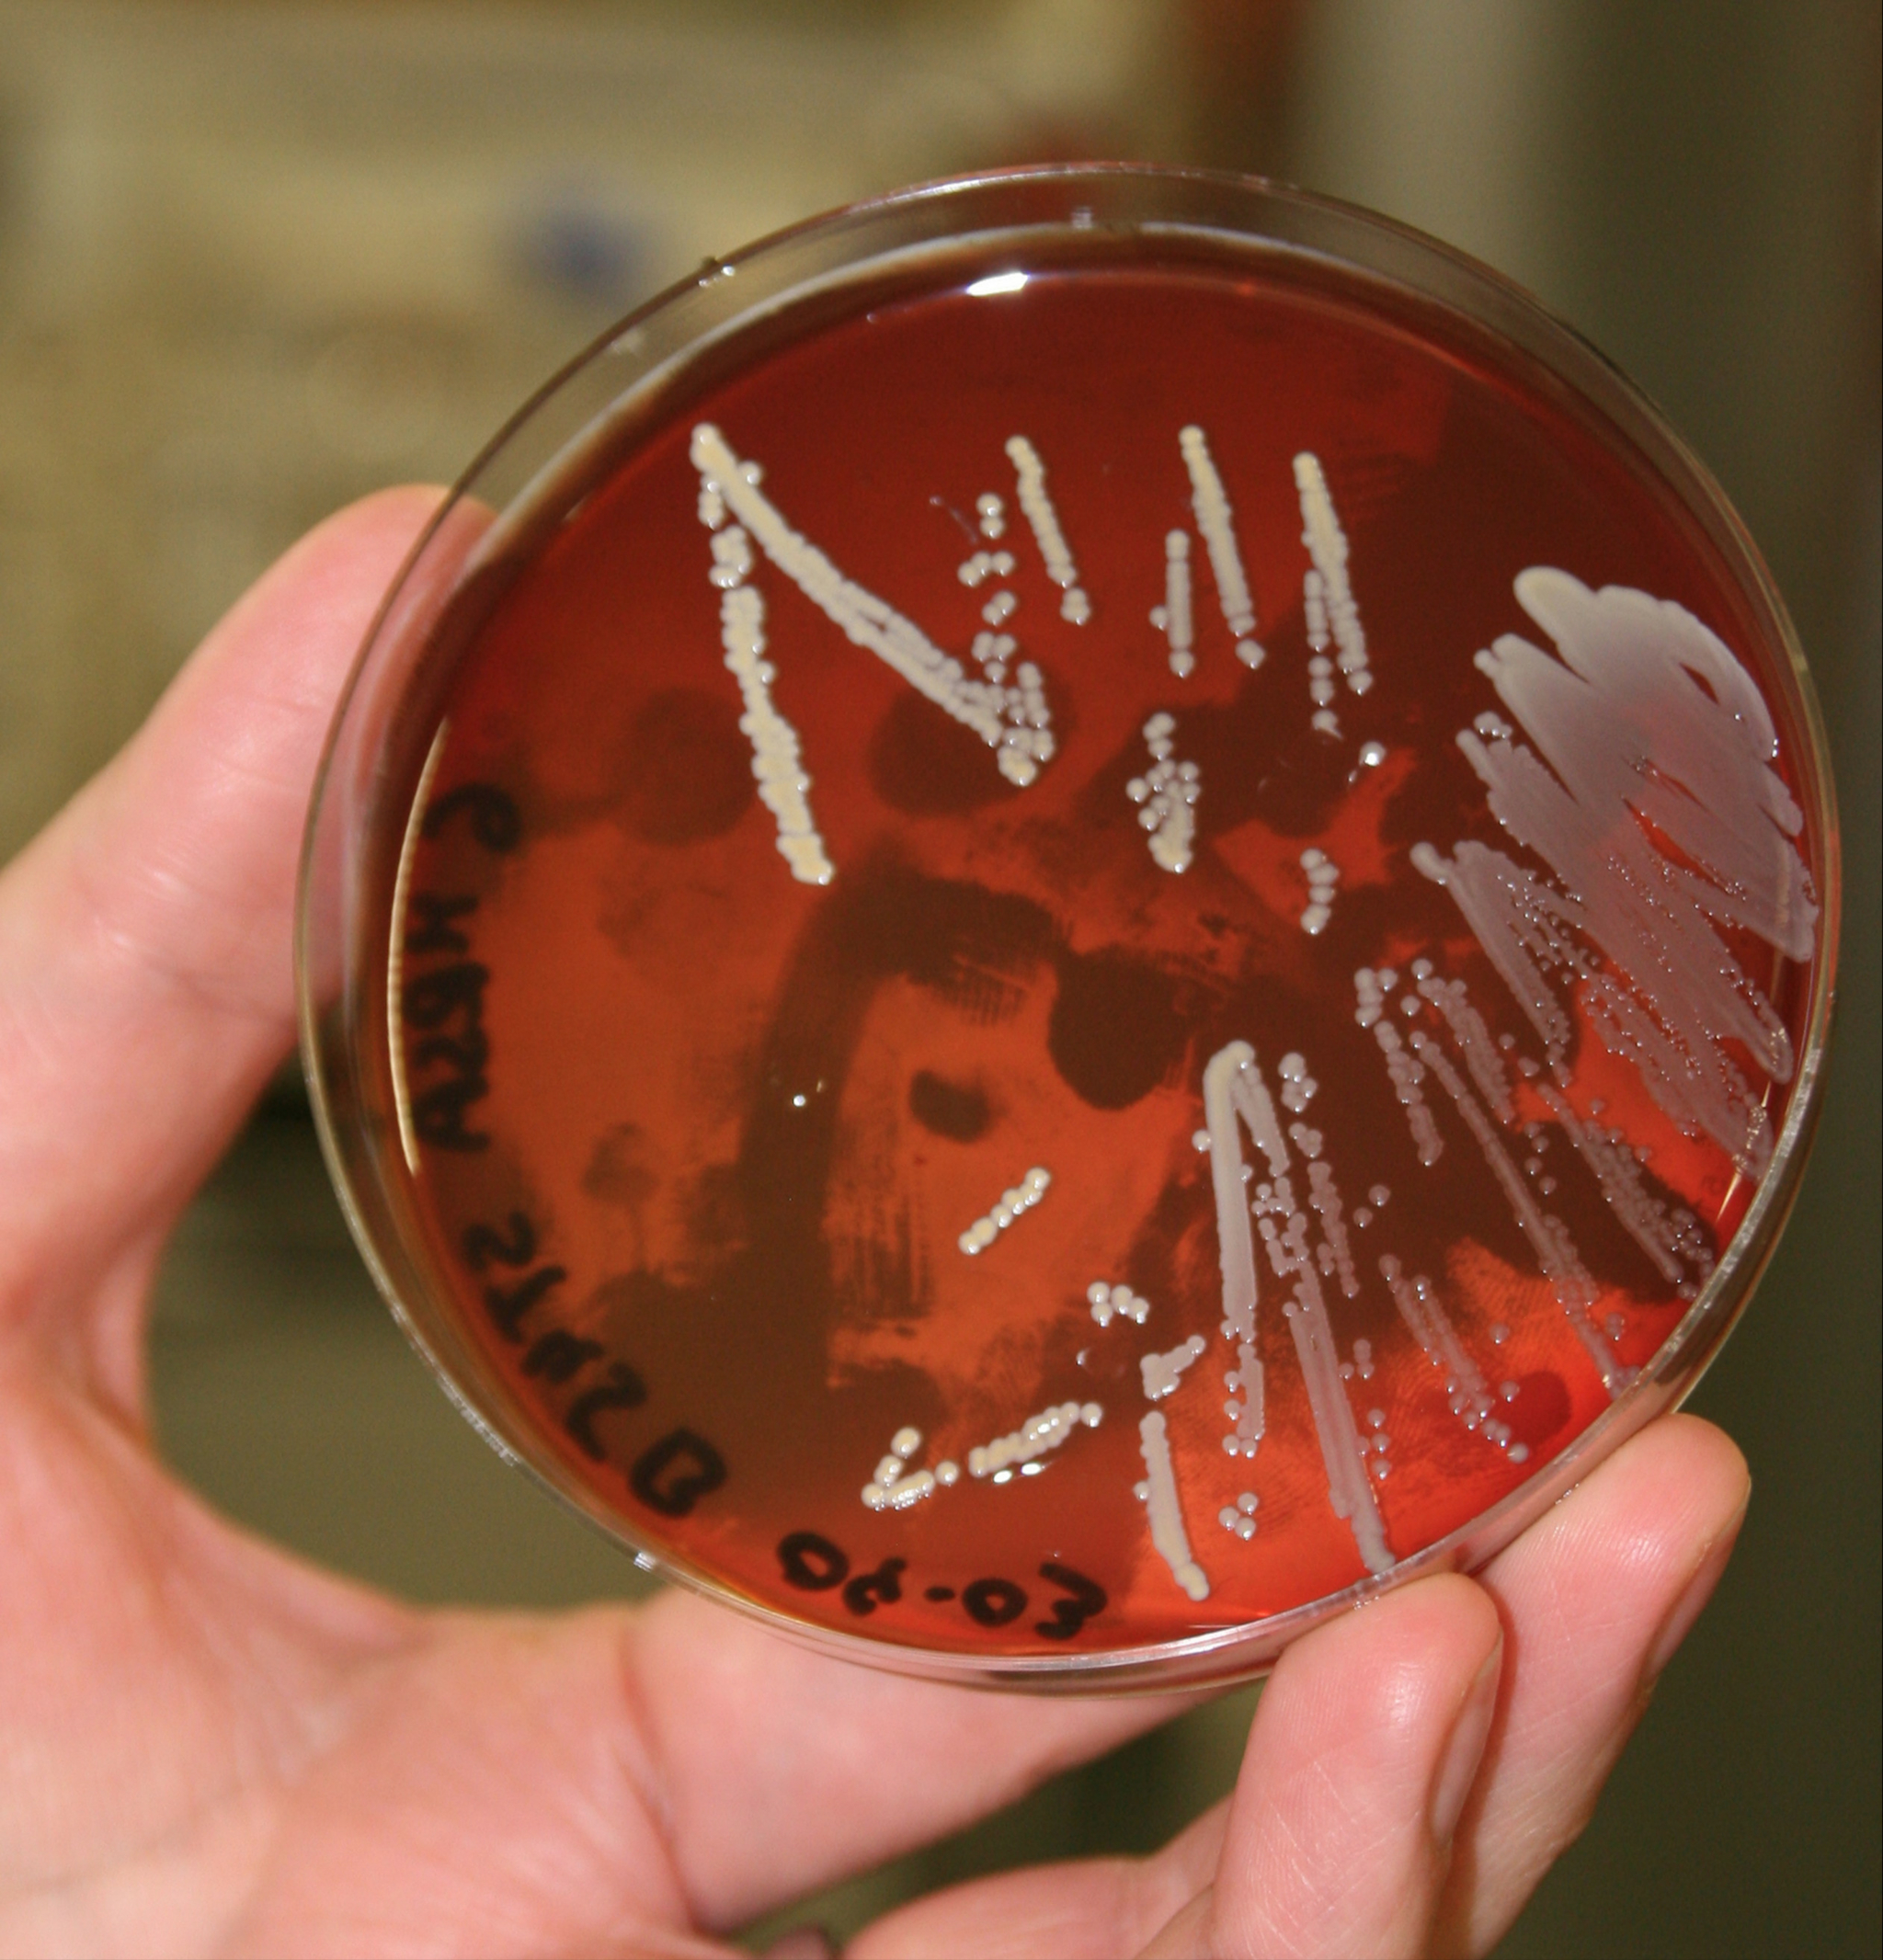 The photo shows white colonies growing in a zickzack pattern on a red agar plate